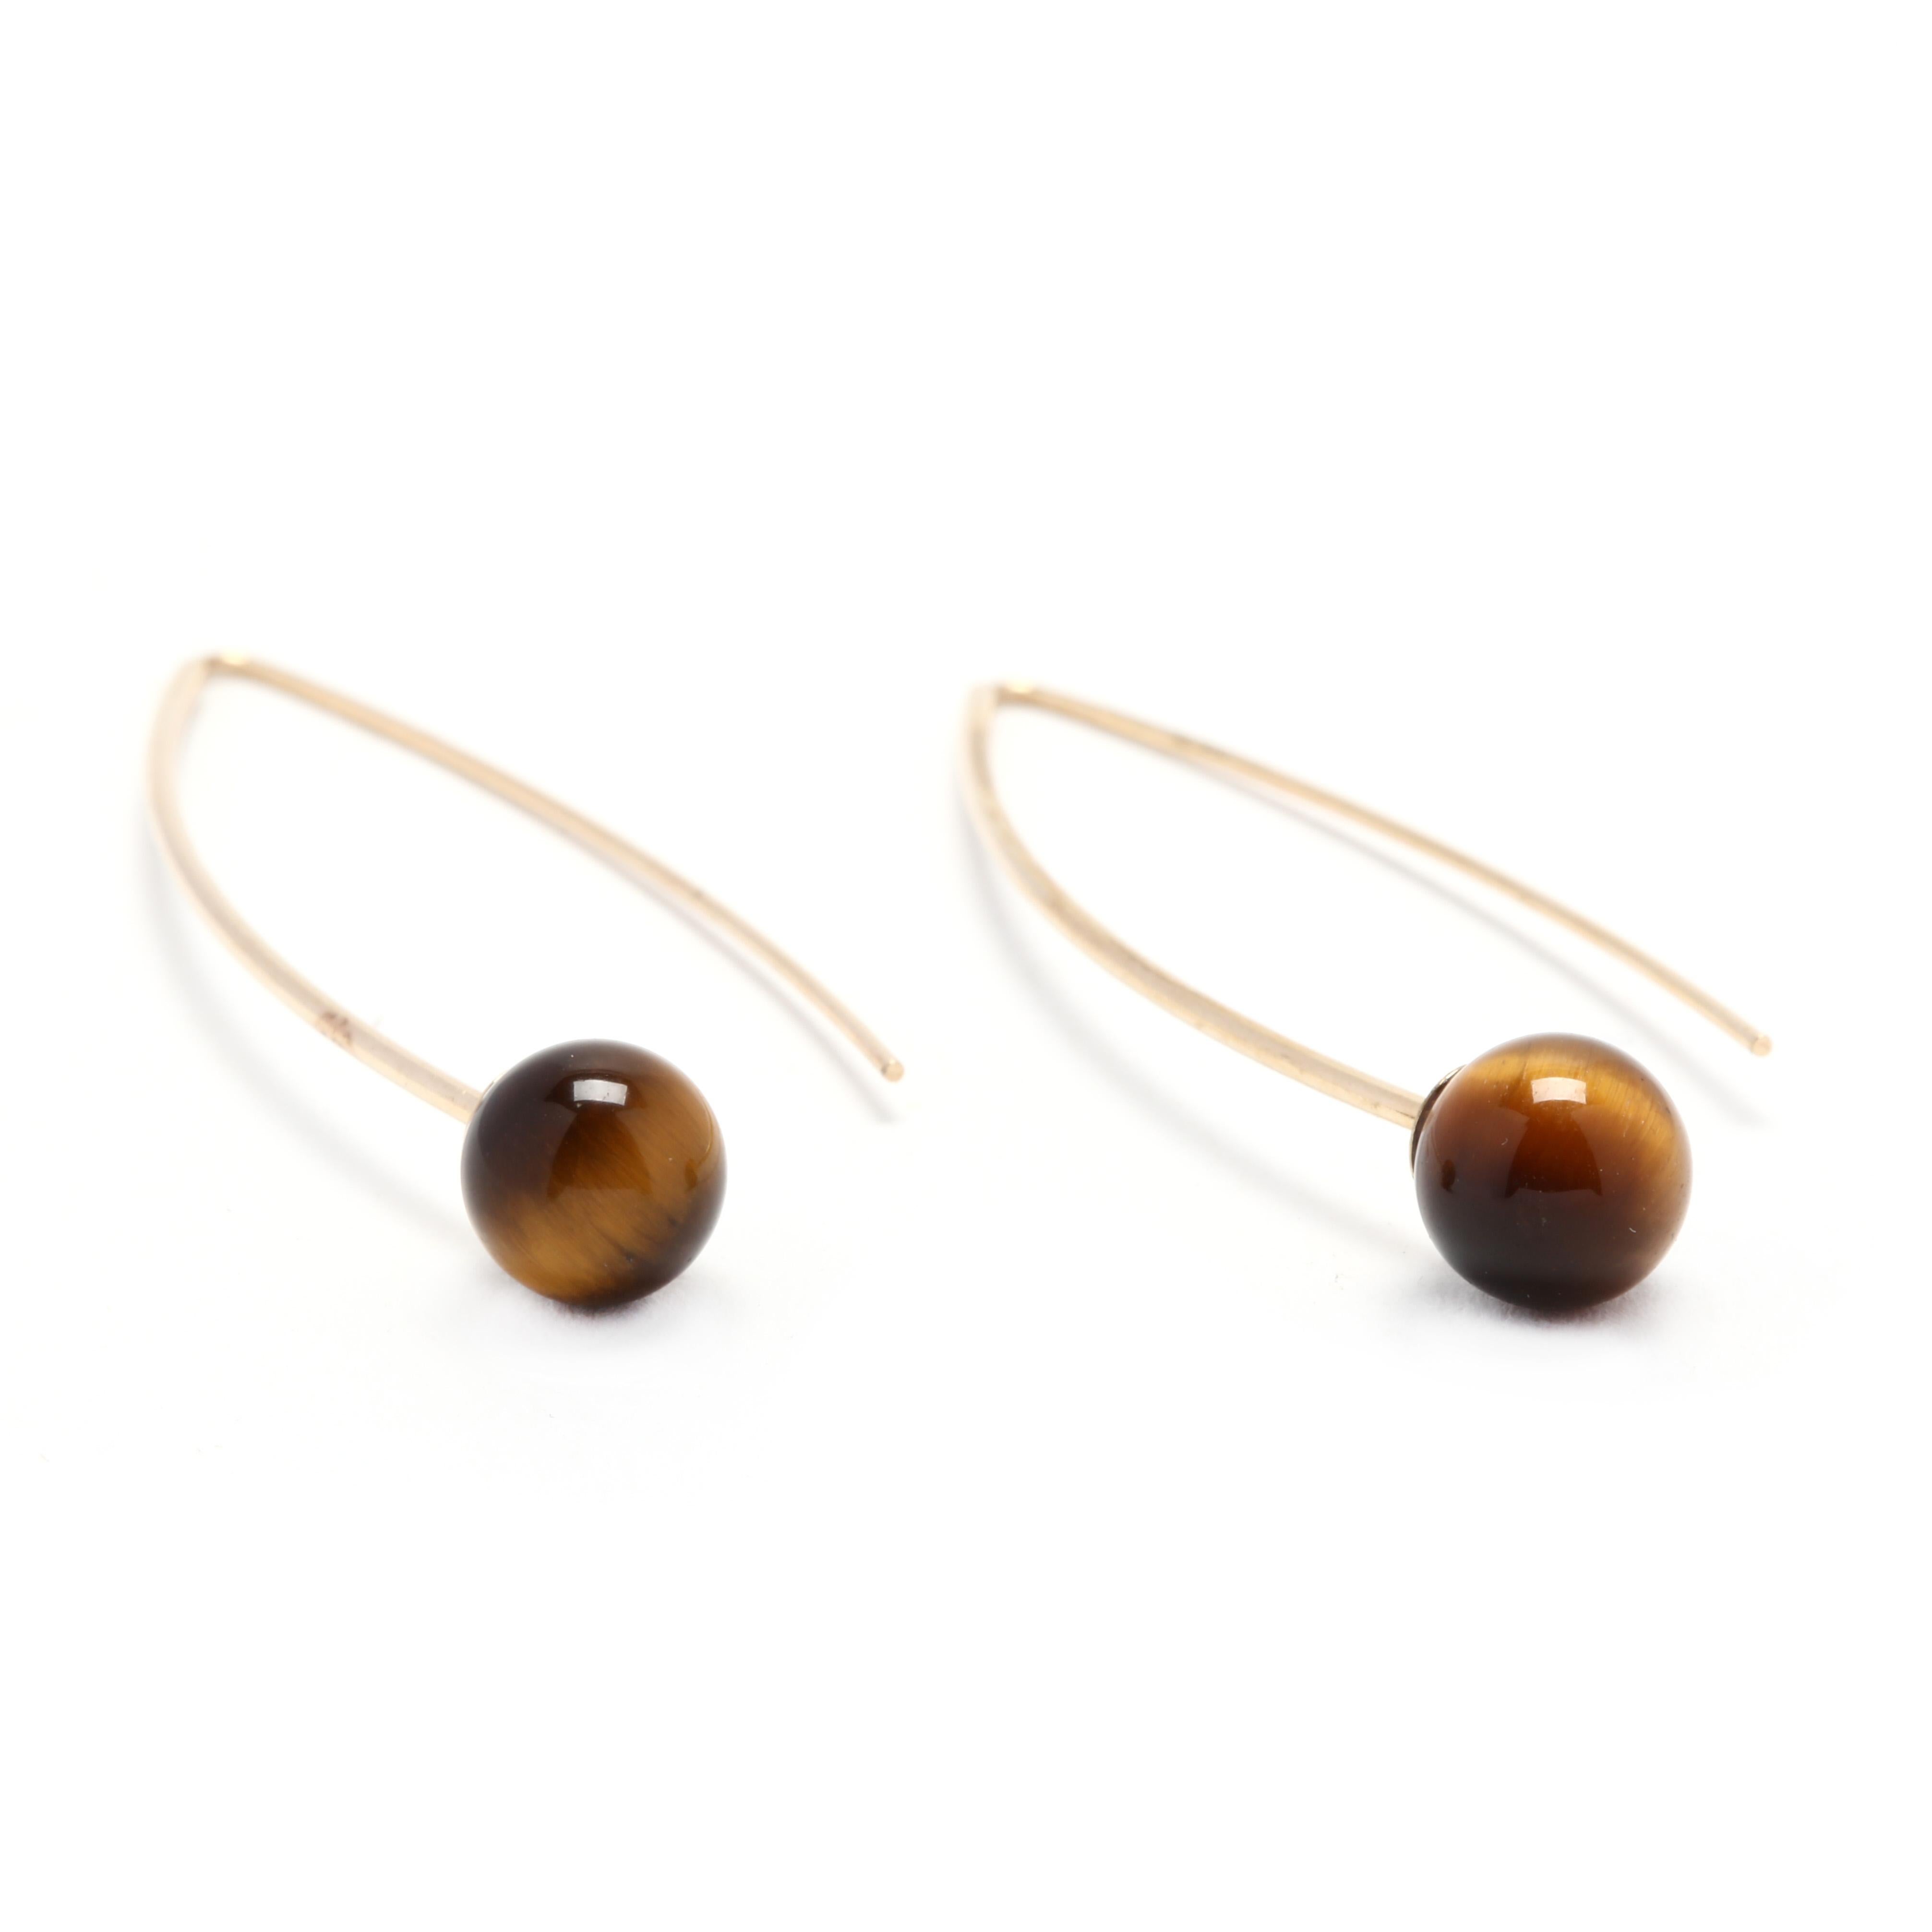 A pair of 14 karat yellow gold tiger's eye earrings. These earrings feature a navette ear wire shape with a round tiger's eye bead on each earring.

Stones:
- tiger's eye, 2 stones
- round bead
- 7.25 mm

Length: 1.75 in.

Width: 1/2 in.

1.2